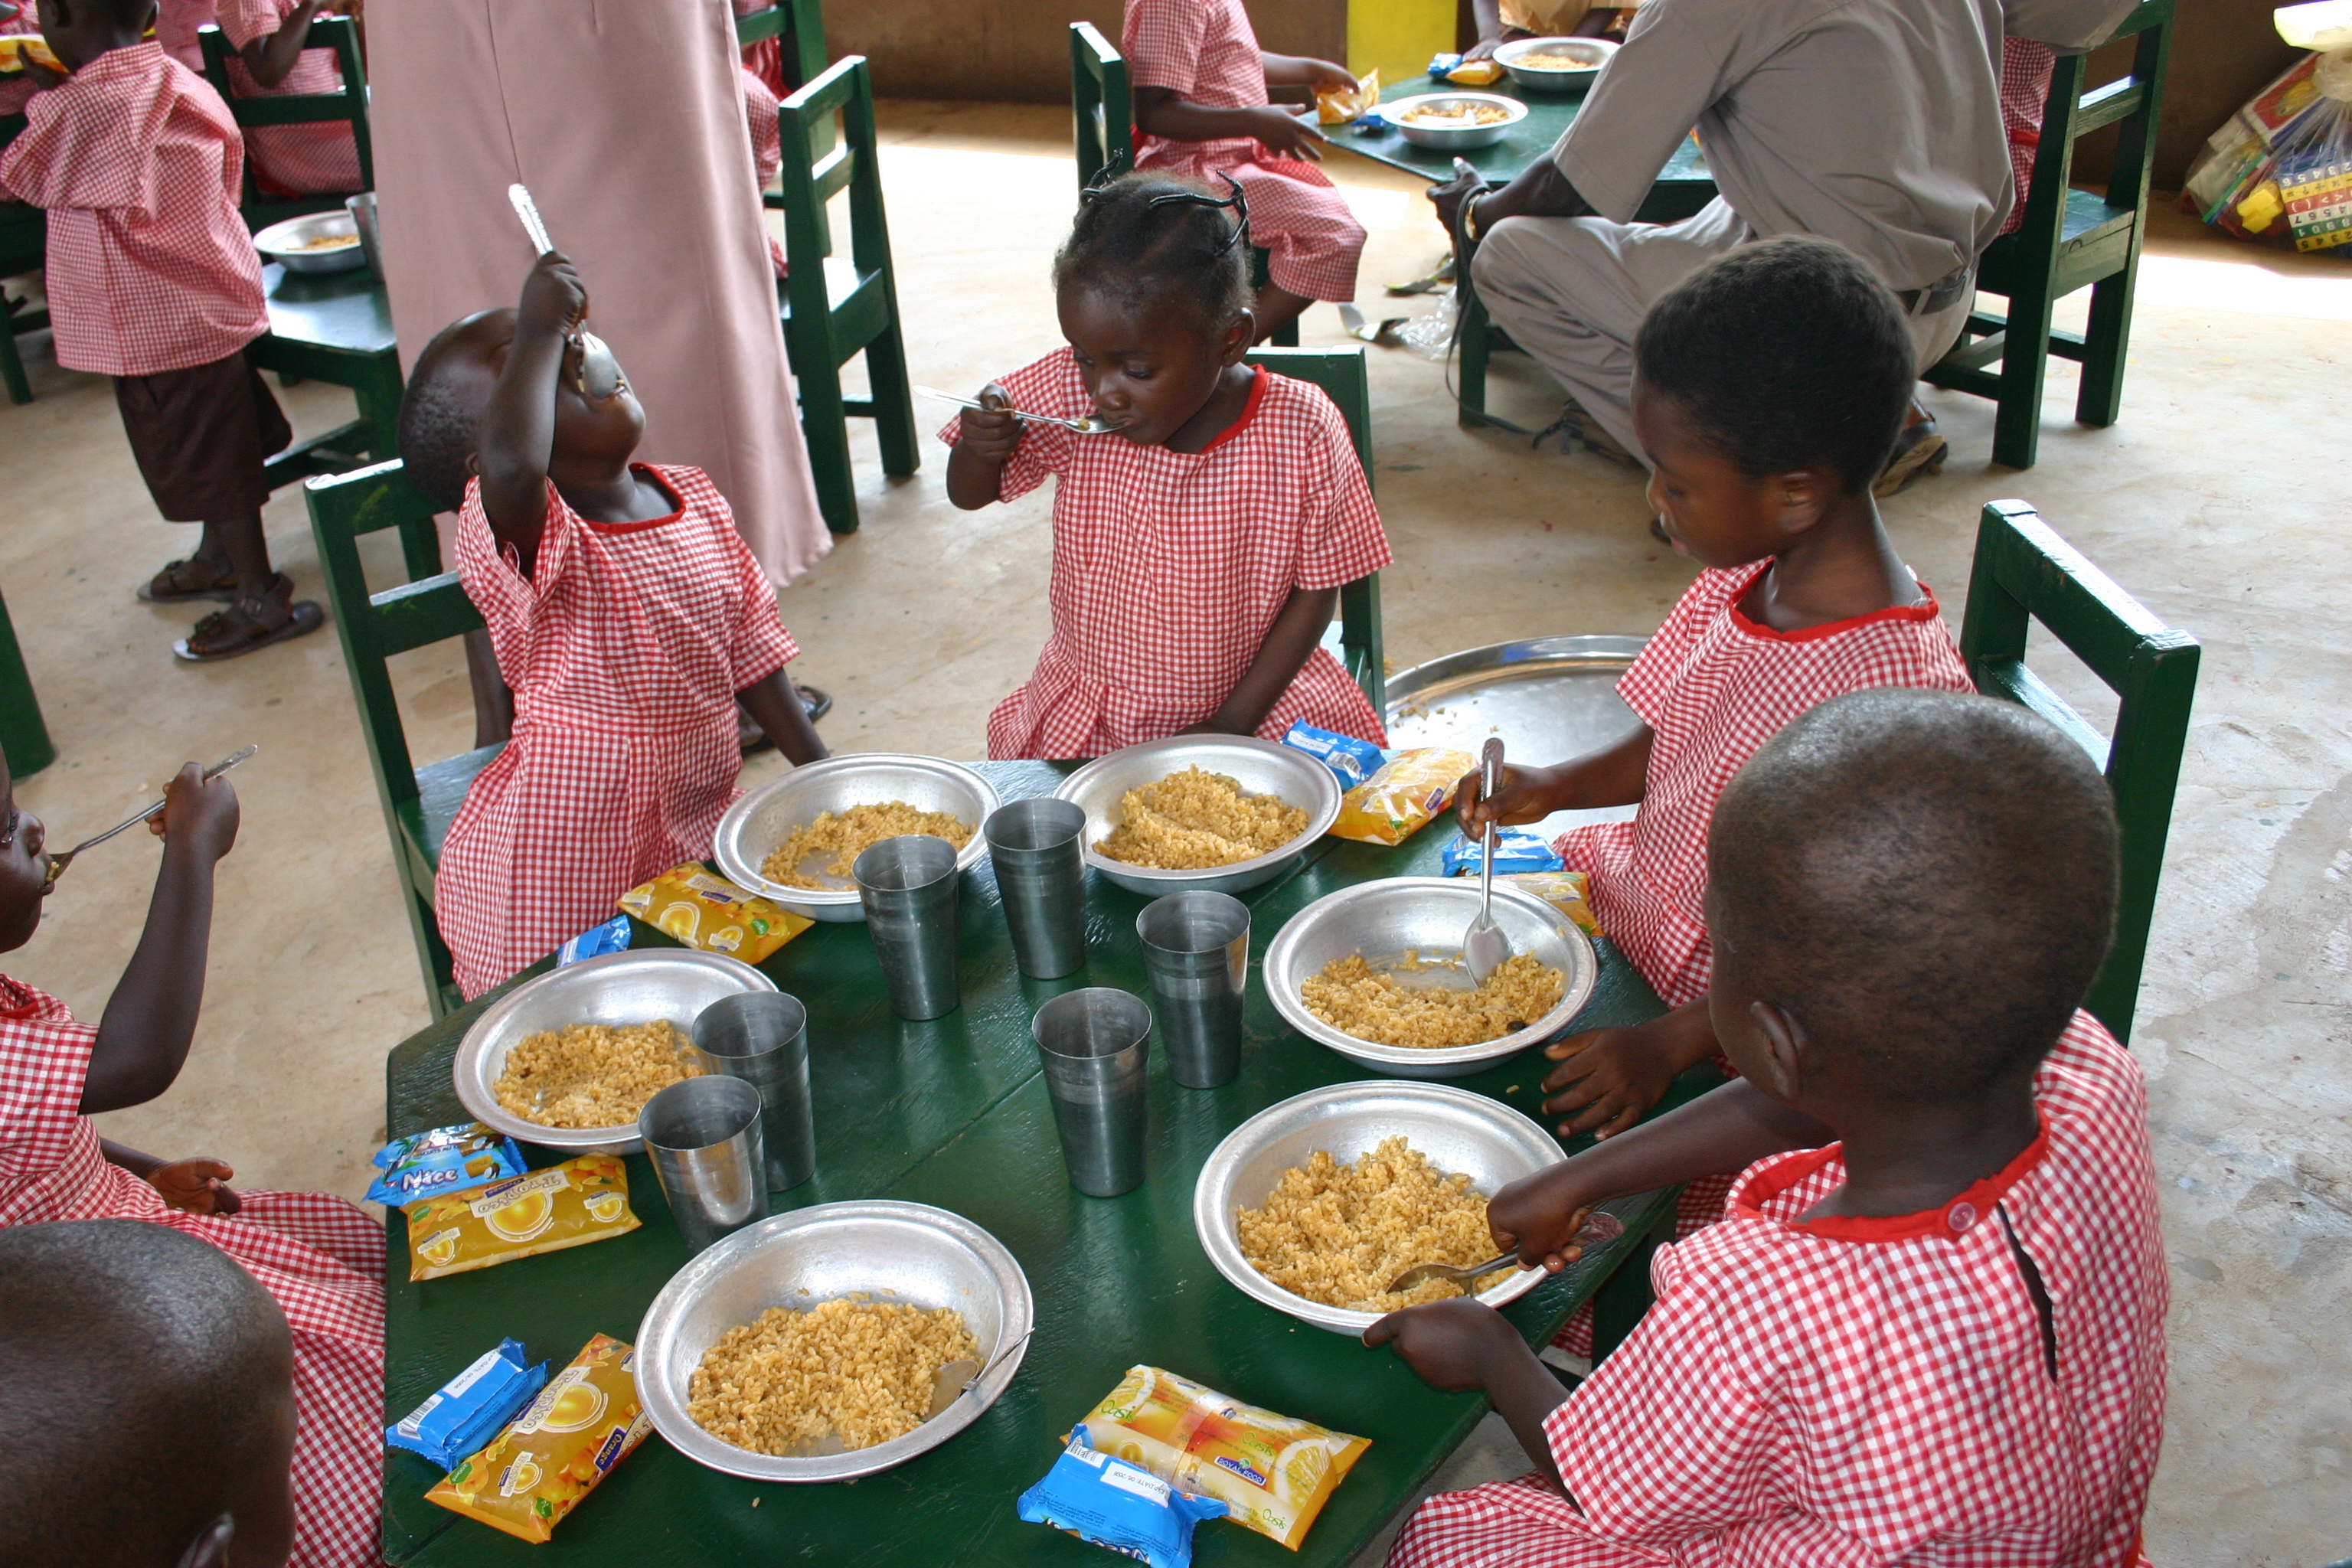 Child malnutrition costs Ghana more than $2 billion annually: experts